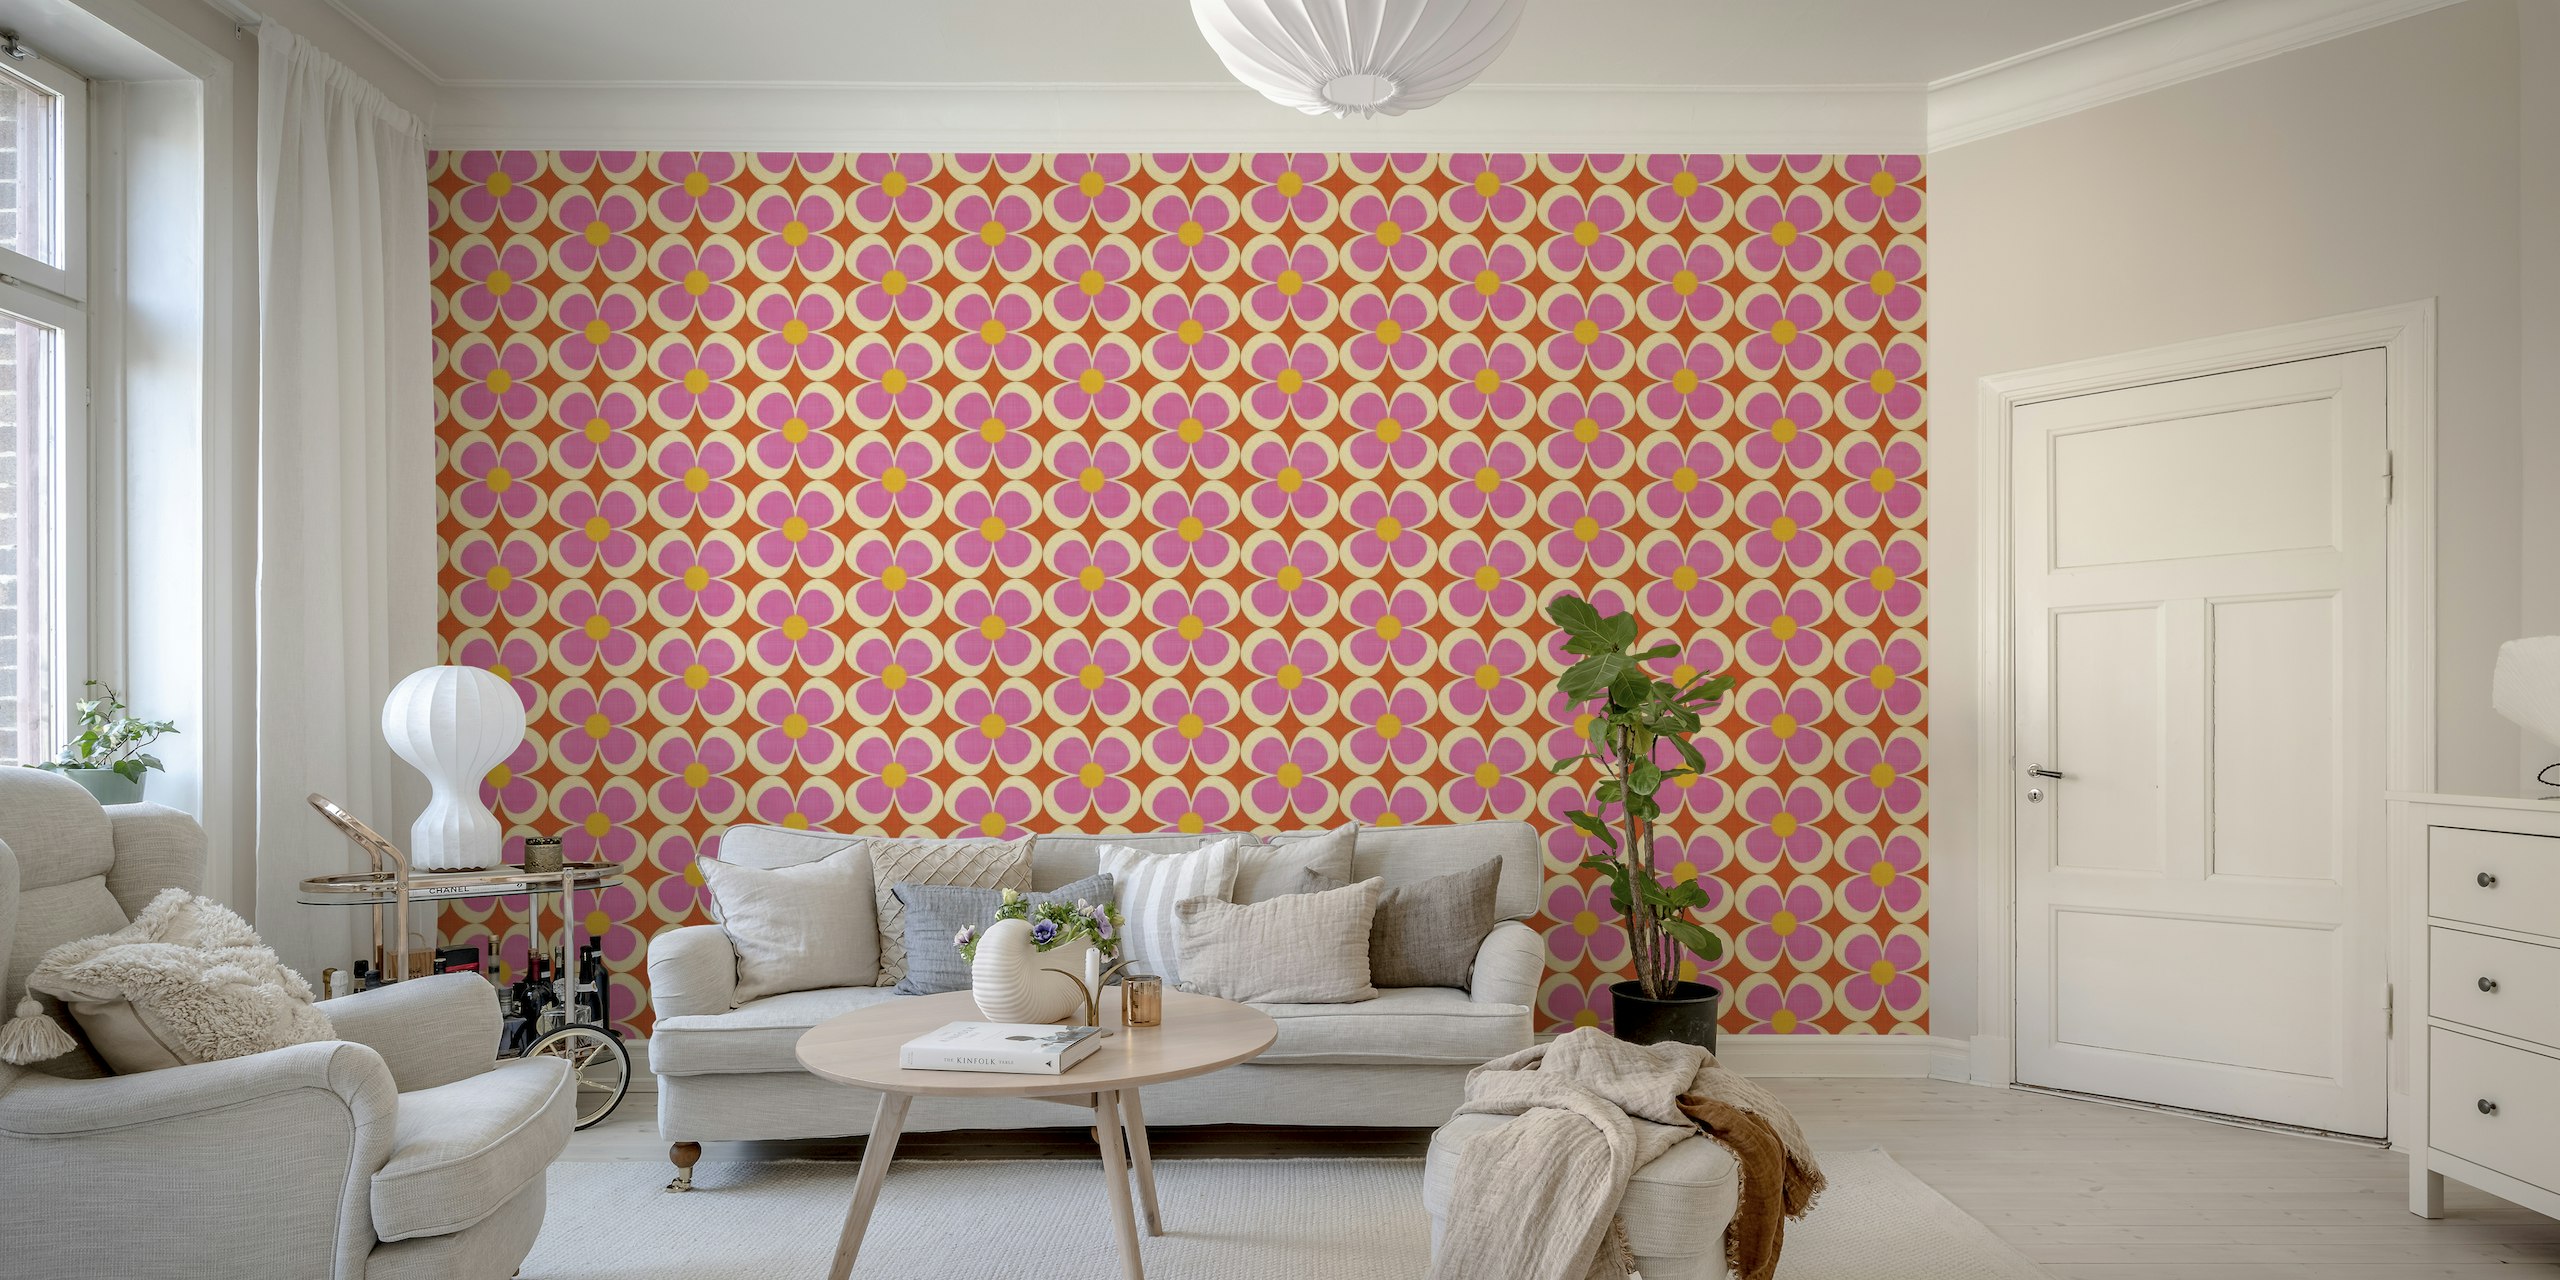 Groovy Geometric Floral Pink Orange Red Small wallpaper